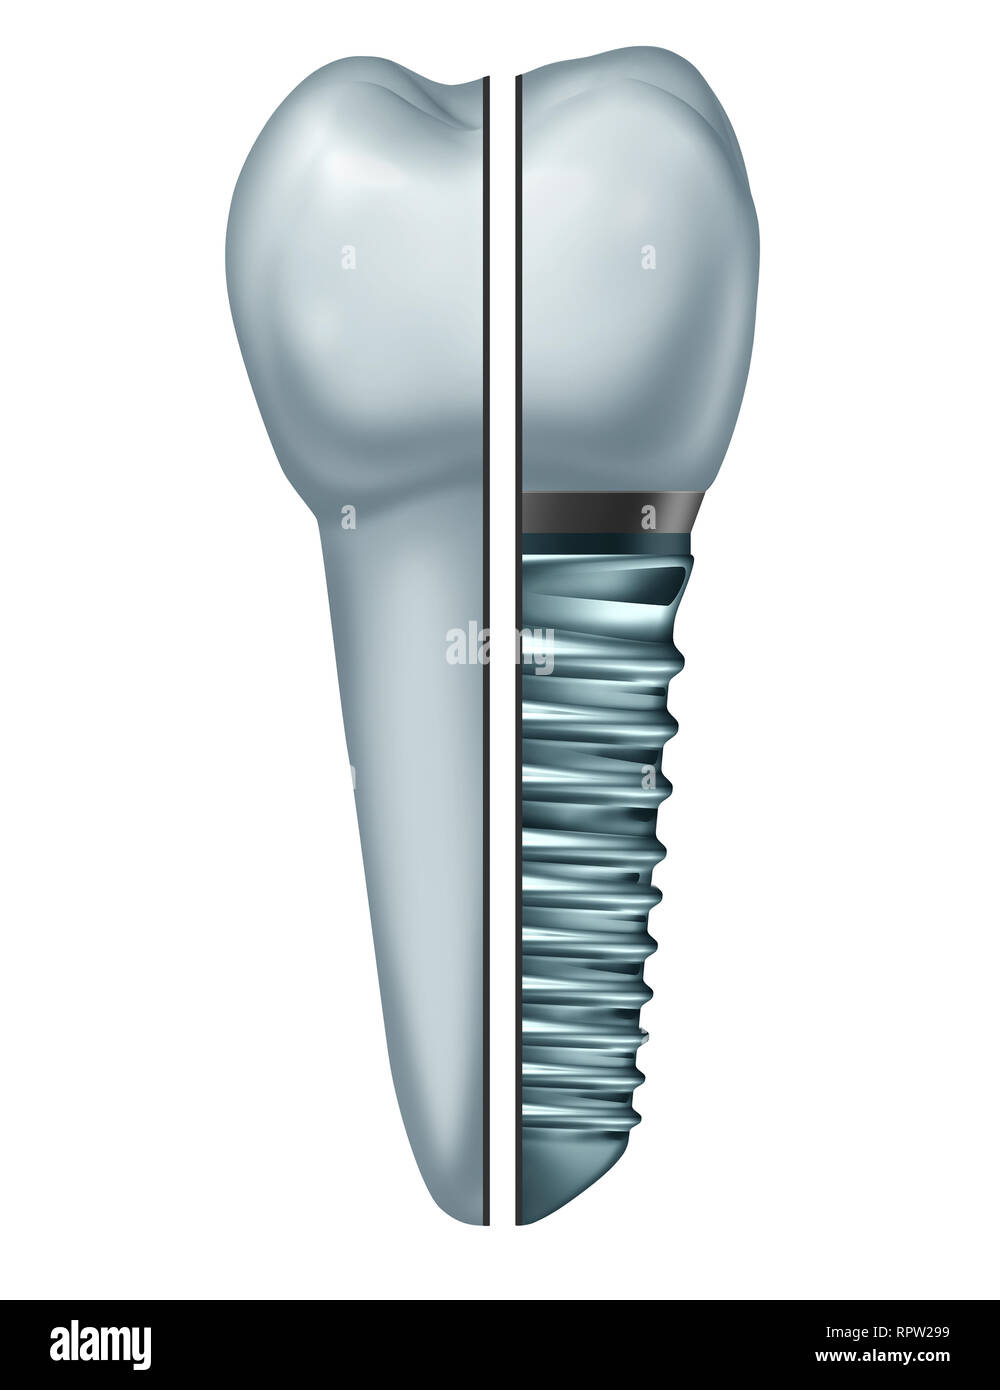 Dental Implant tooth or endosseous tooth prosthetic comparison with an orthodontic crown abutement and metal screw isolated on a white background. Stock Photo